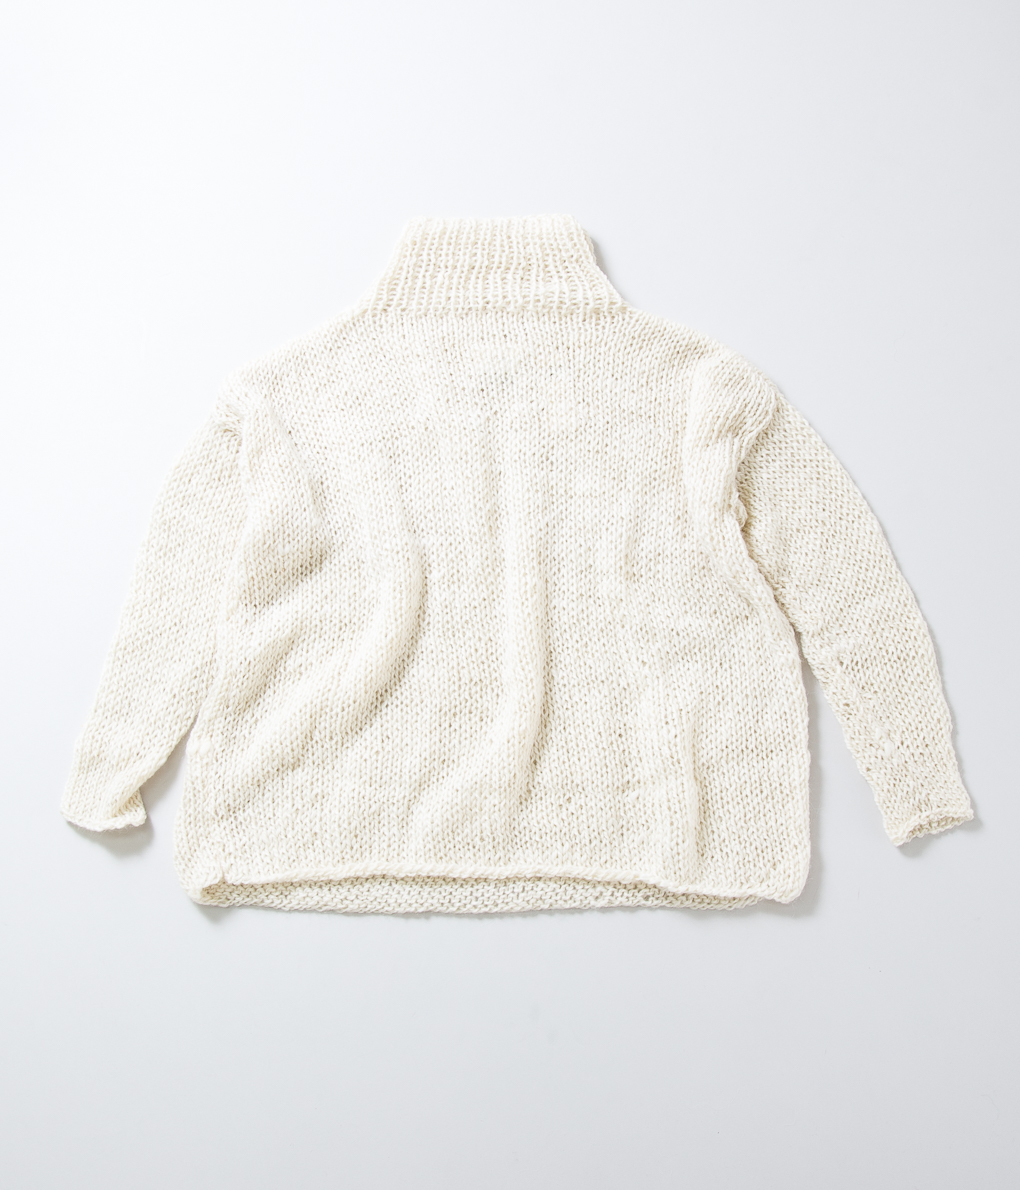 New Arrival “MAYDI” | well-made by MAIDENS SHOP